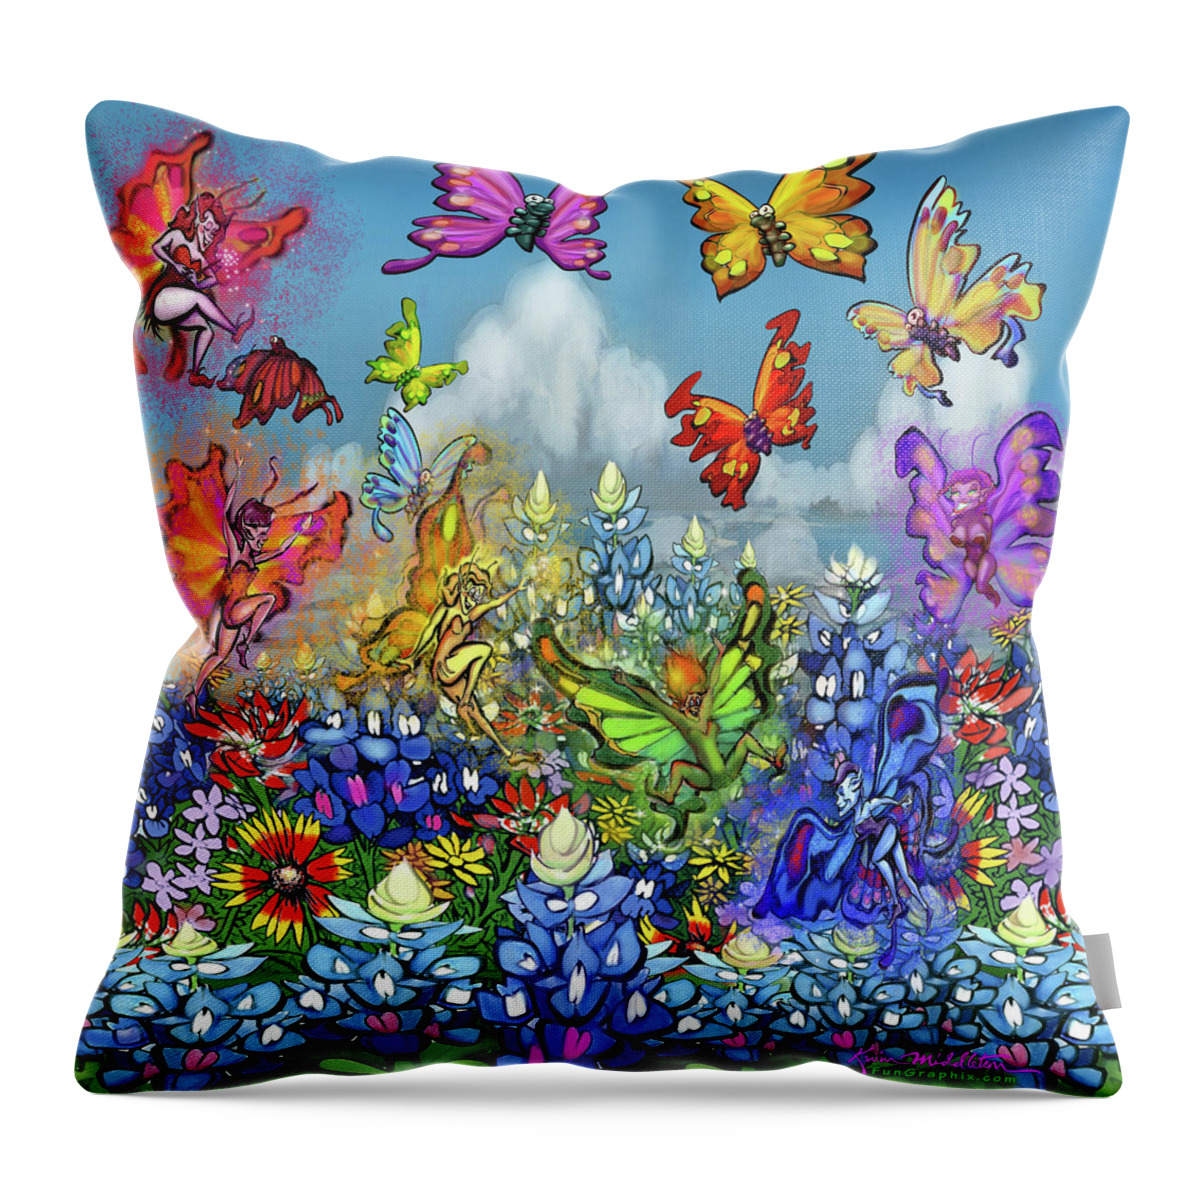 Wildflowers Throw Pillow featuring the digital art Wildflowers Pixies Bluebonnets n Butterflies by Kevin Middleton